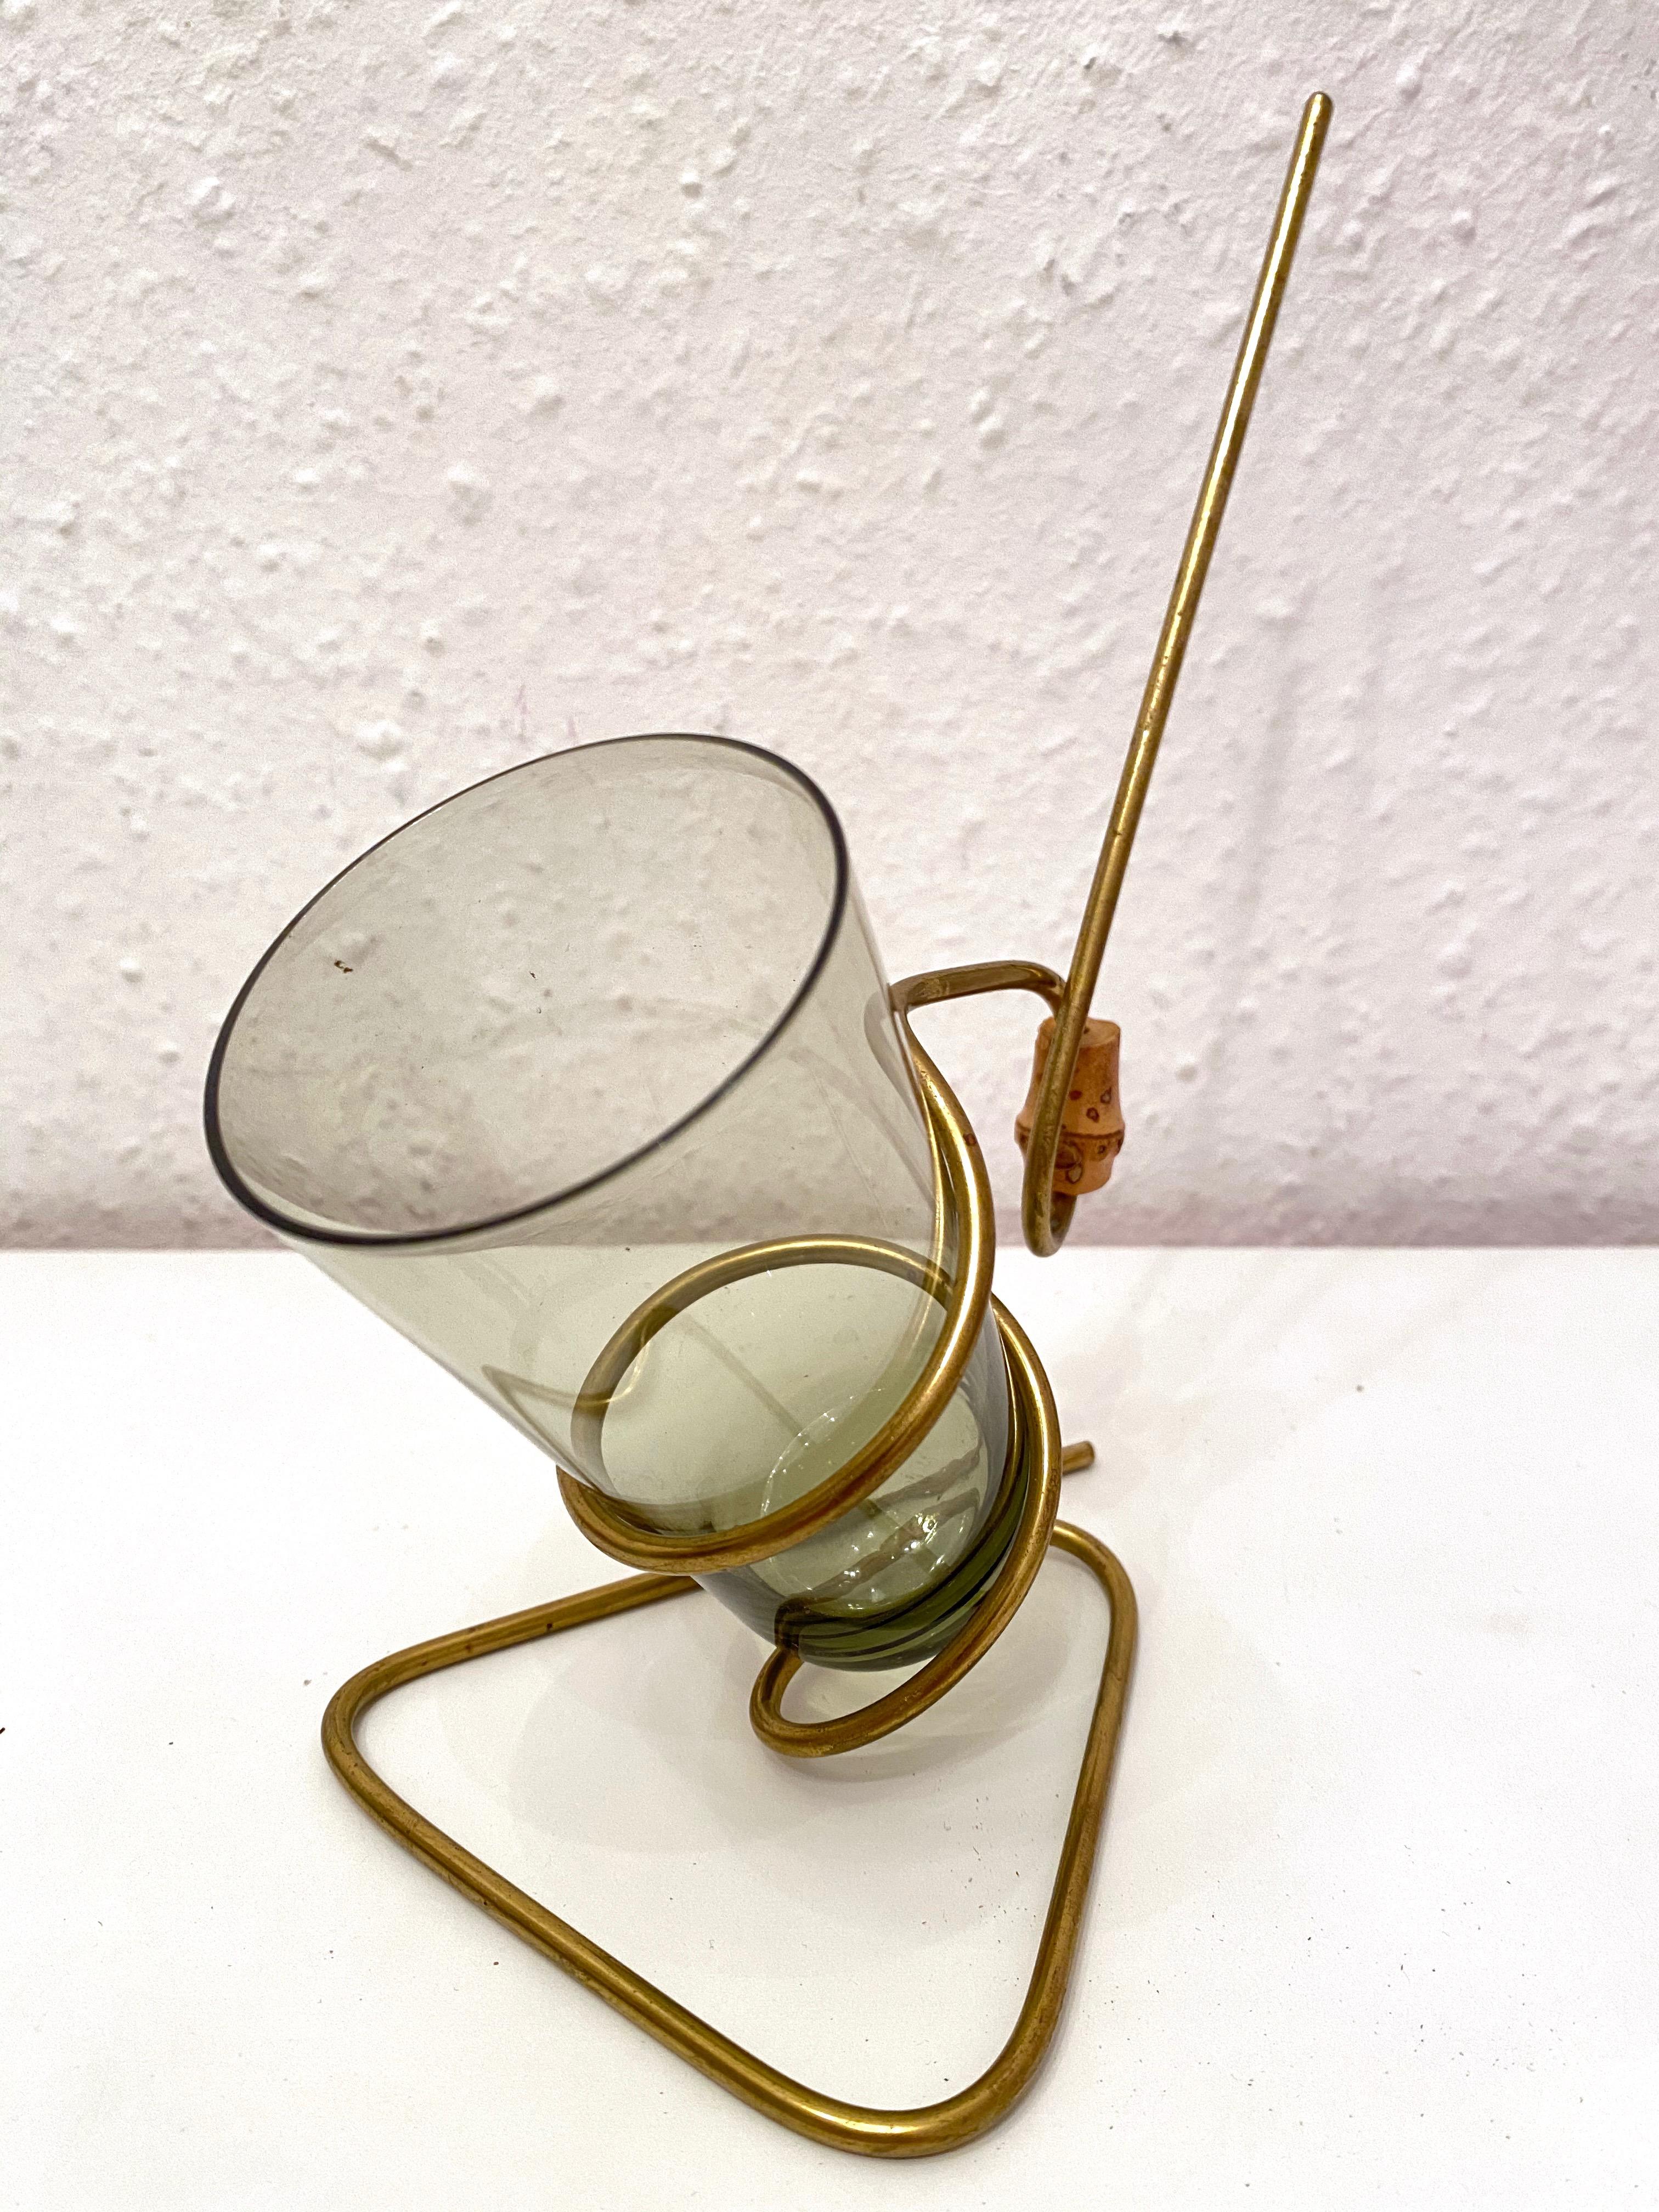 This lovely piece is typical 1950s. The glass is for salt sticks or nuts and the golden metal stand is for pretzels.
The handle is made of bamboo. The glass is smoked grey and the metal holder is in gold with some patina.
The set is in very good